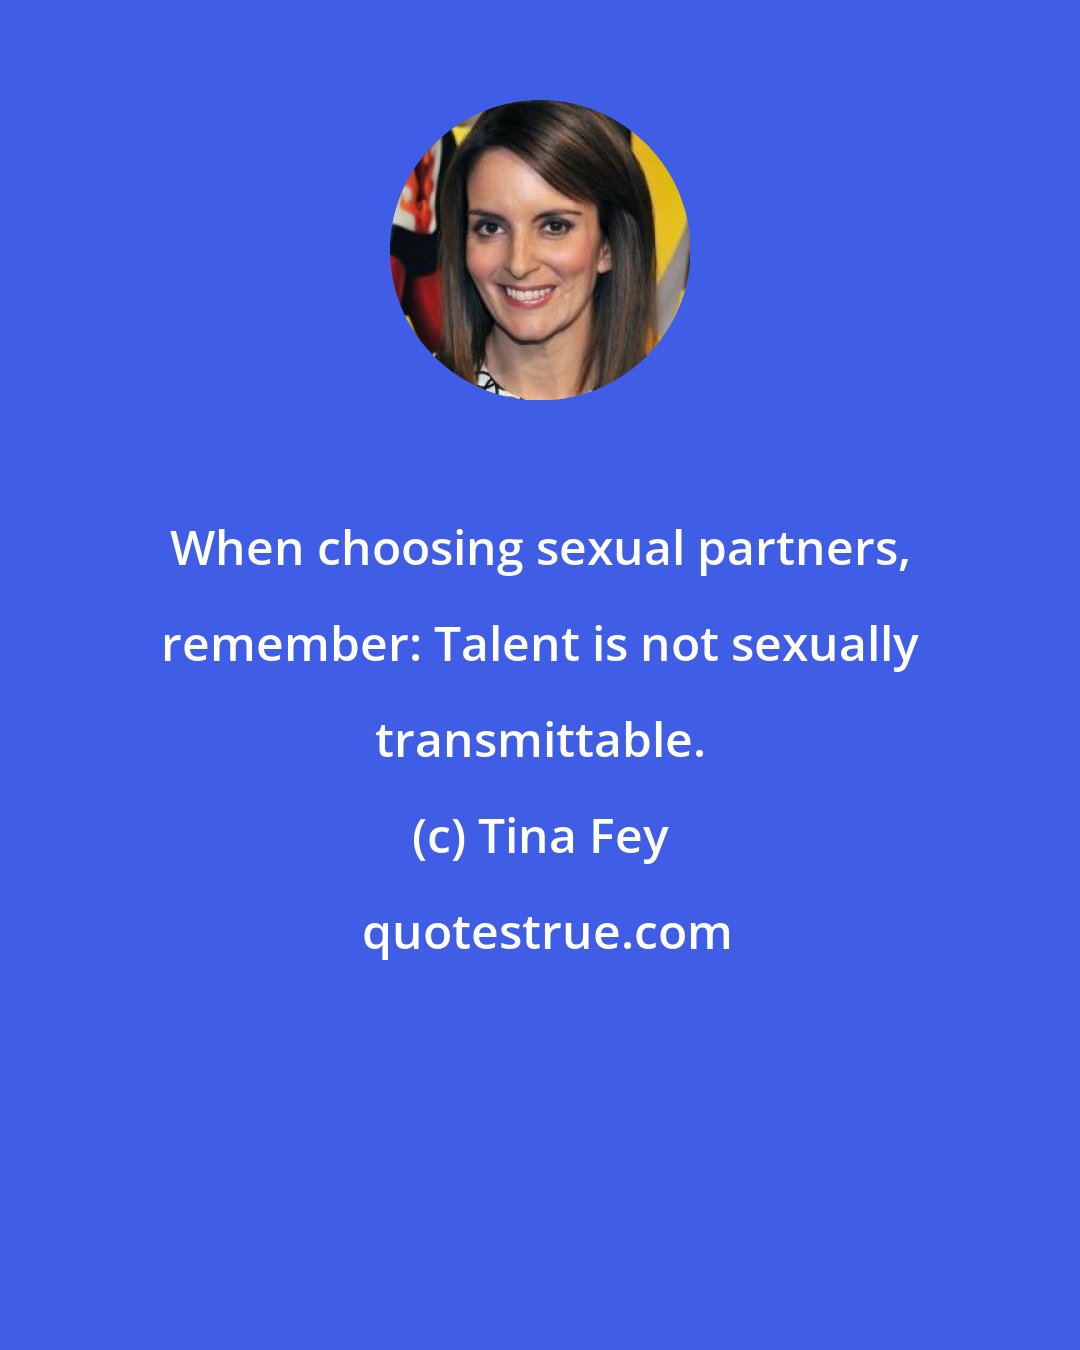 Tina Fey: When choosing sexual partners, remember: Talent is not sexually transmittable.